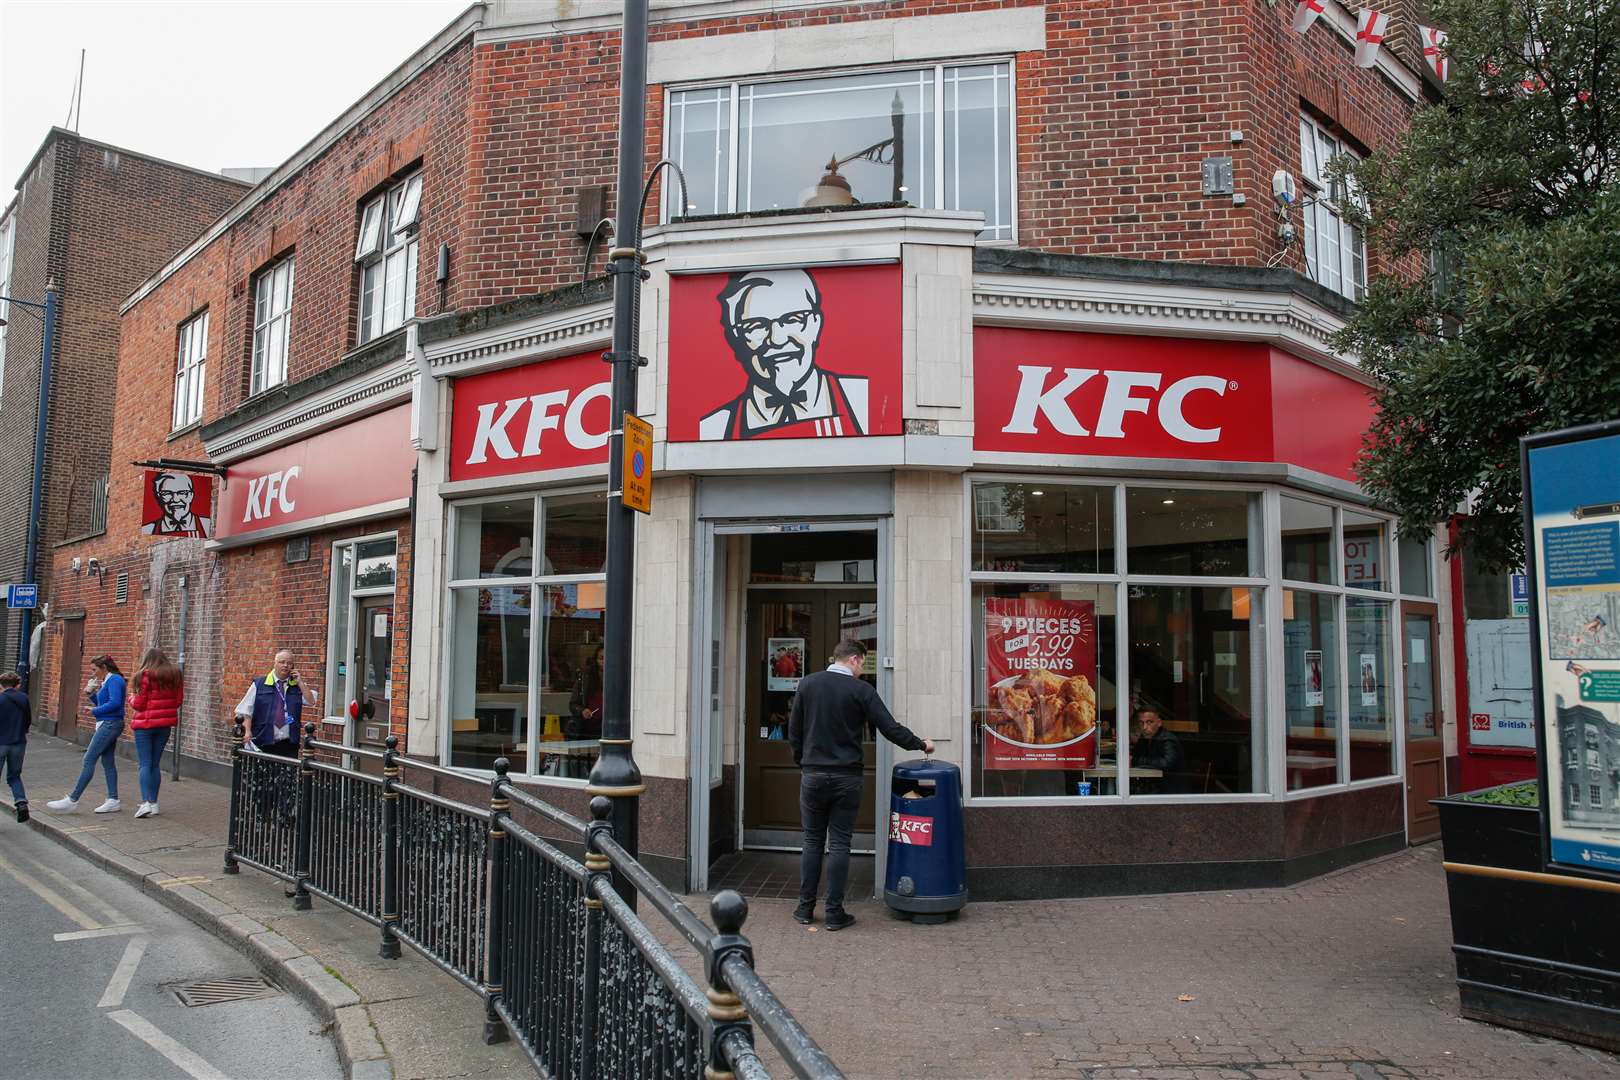 KFC in Dartford High Street, soon to be moving to the nearby Priory Shopping Centre